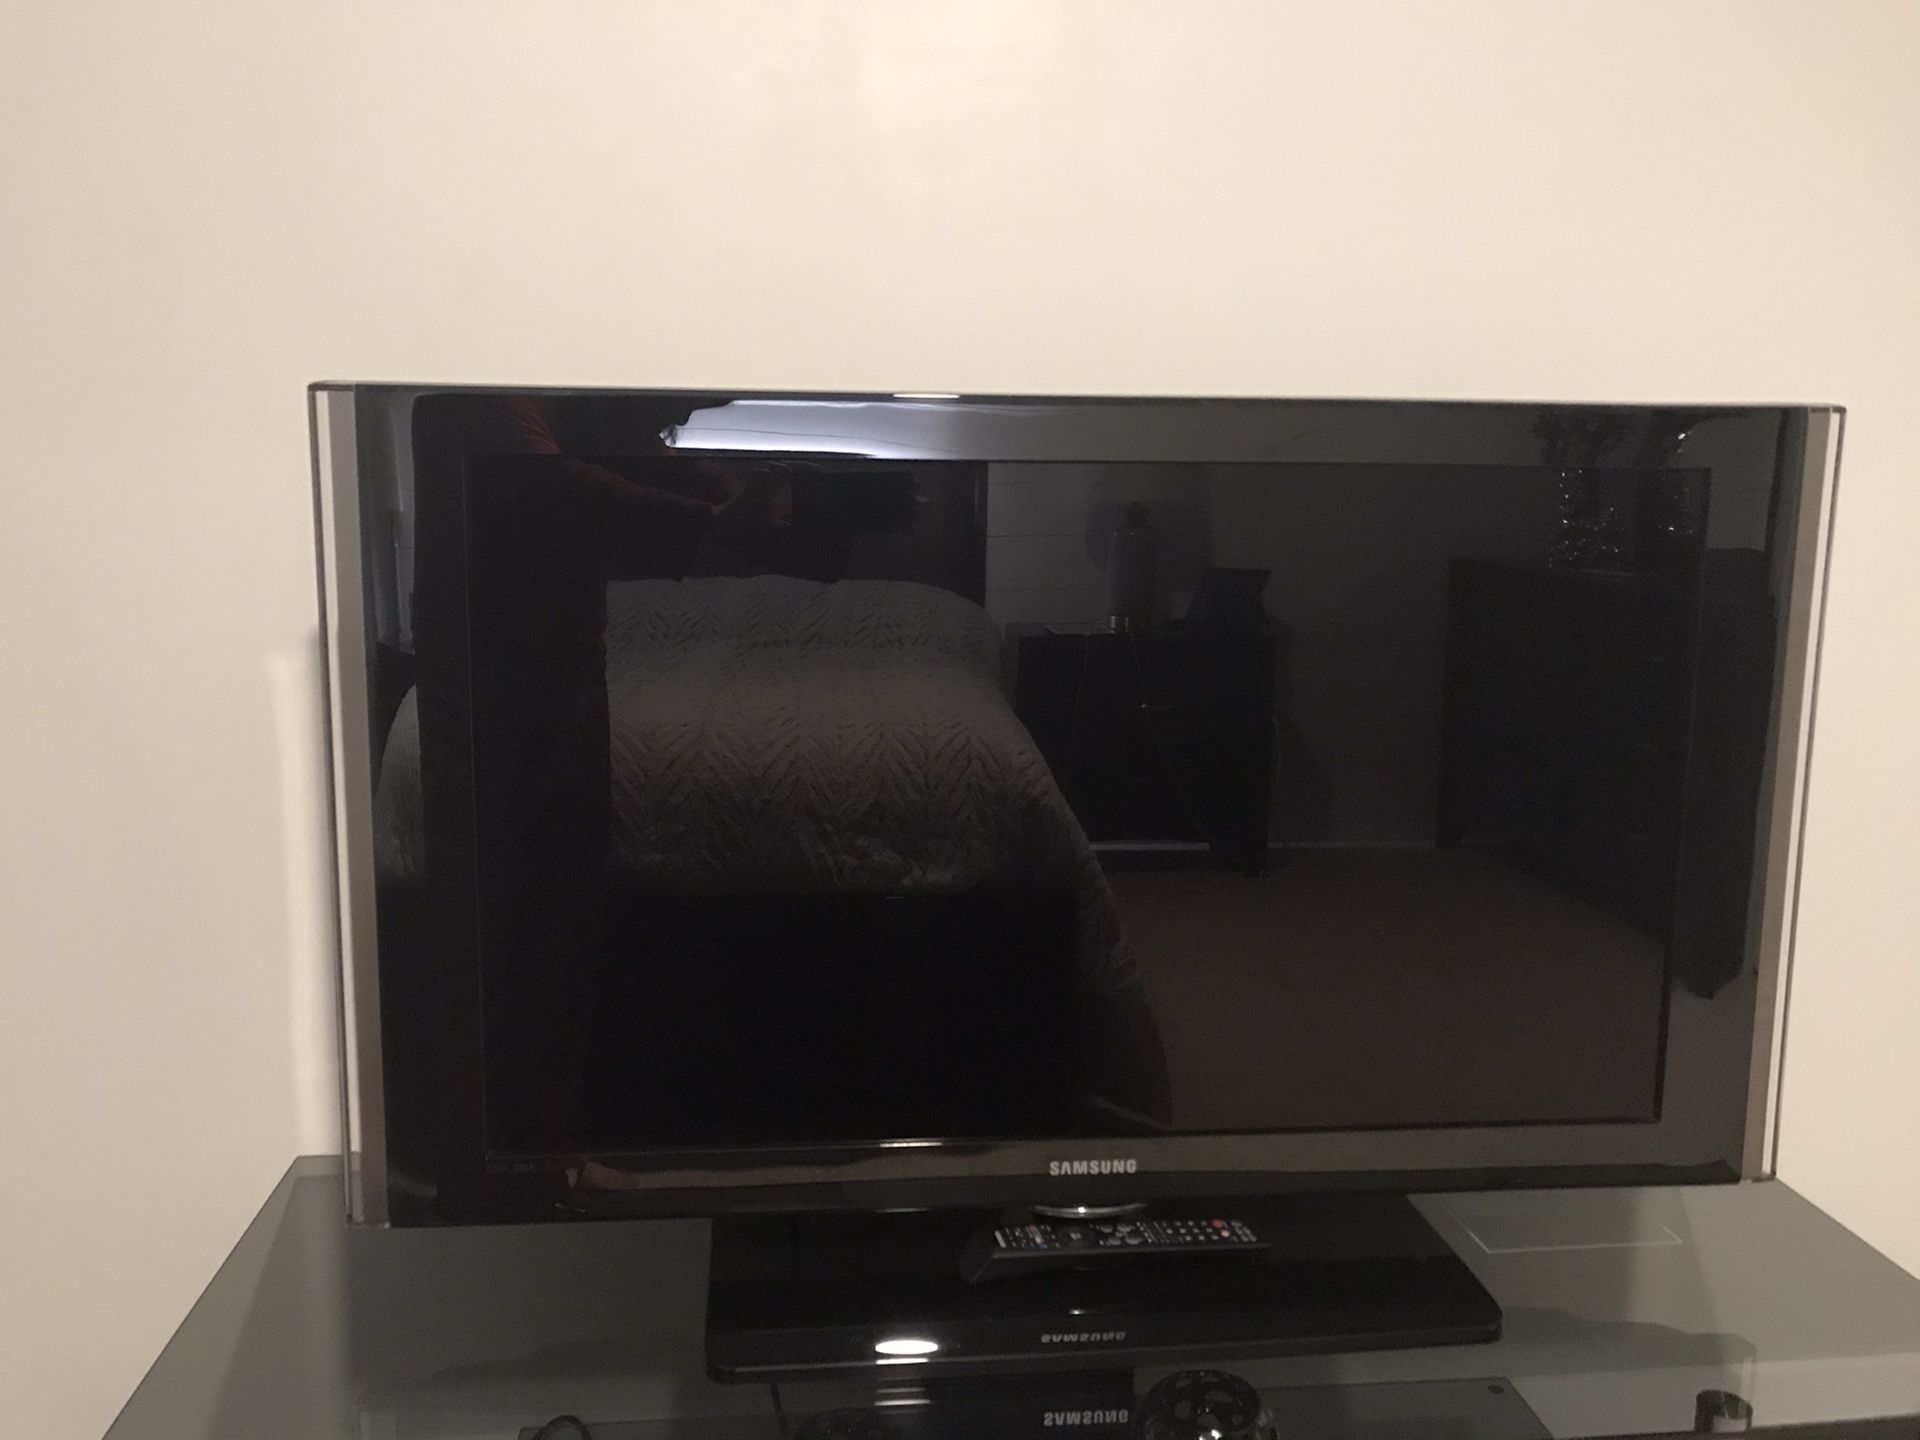 Samsung TV 42” not smart ( new never used)